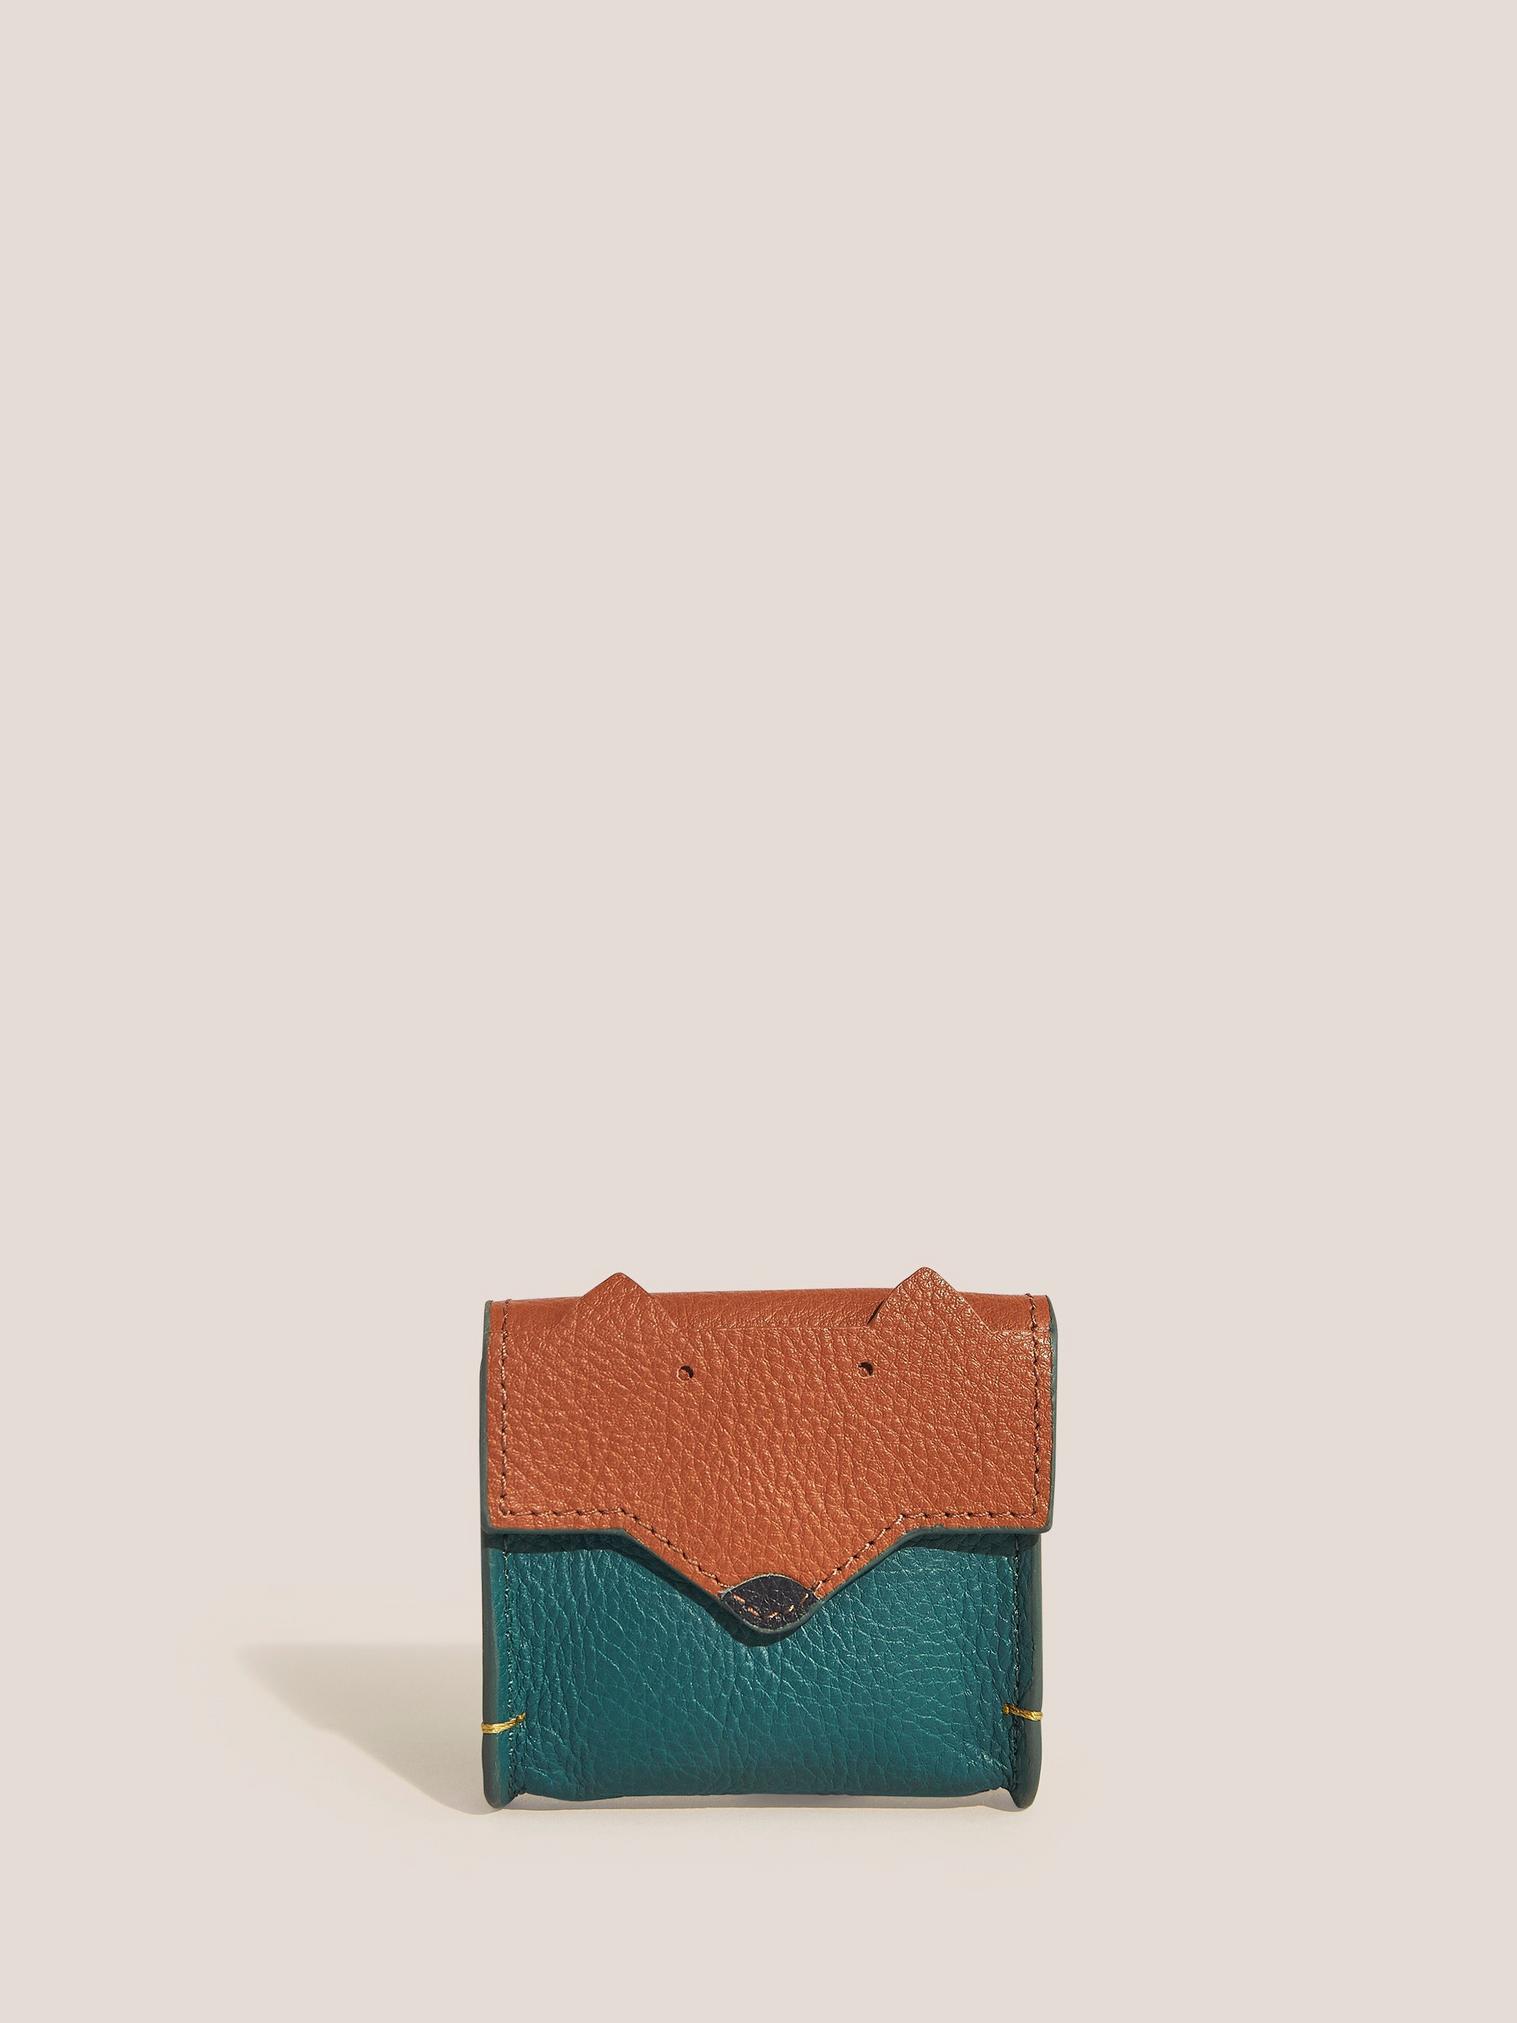 Fox Leather Keyring in TEAL MLT - FLAT FRONT